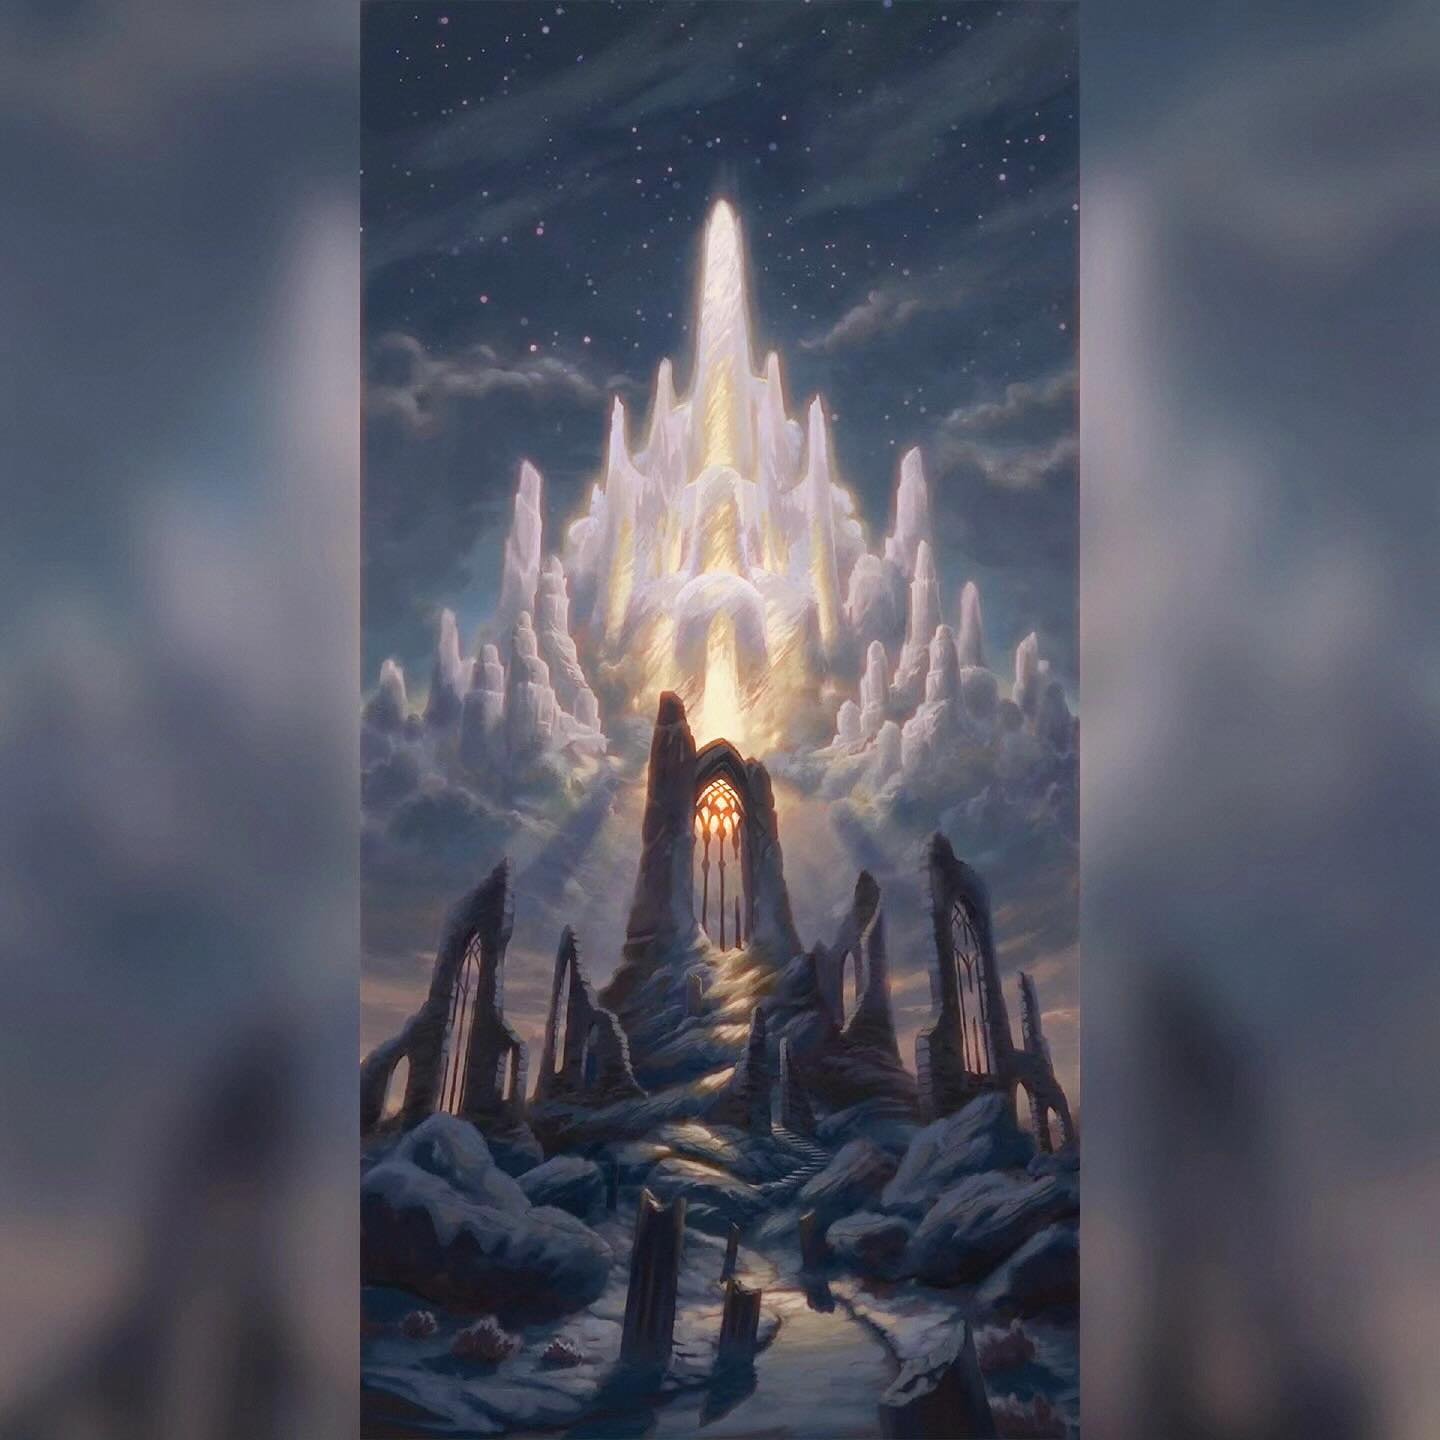 Memory and Dream. Digital, 2024. One of three new works available in the web store.

#theelselands #mtg #magicthegathering #dungeonsanddragons #dnd #tarot #tarotcard #tarotcards #tarotdeck #tarotdecks #thetower #dungeonsynth #fantasyart